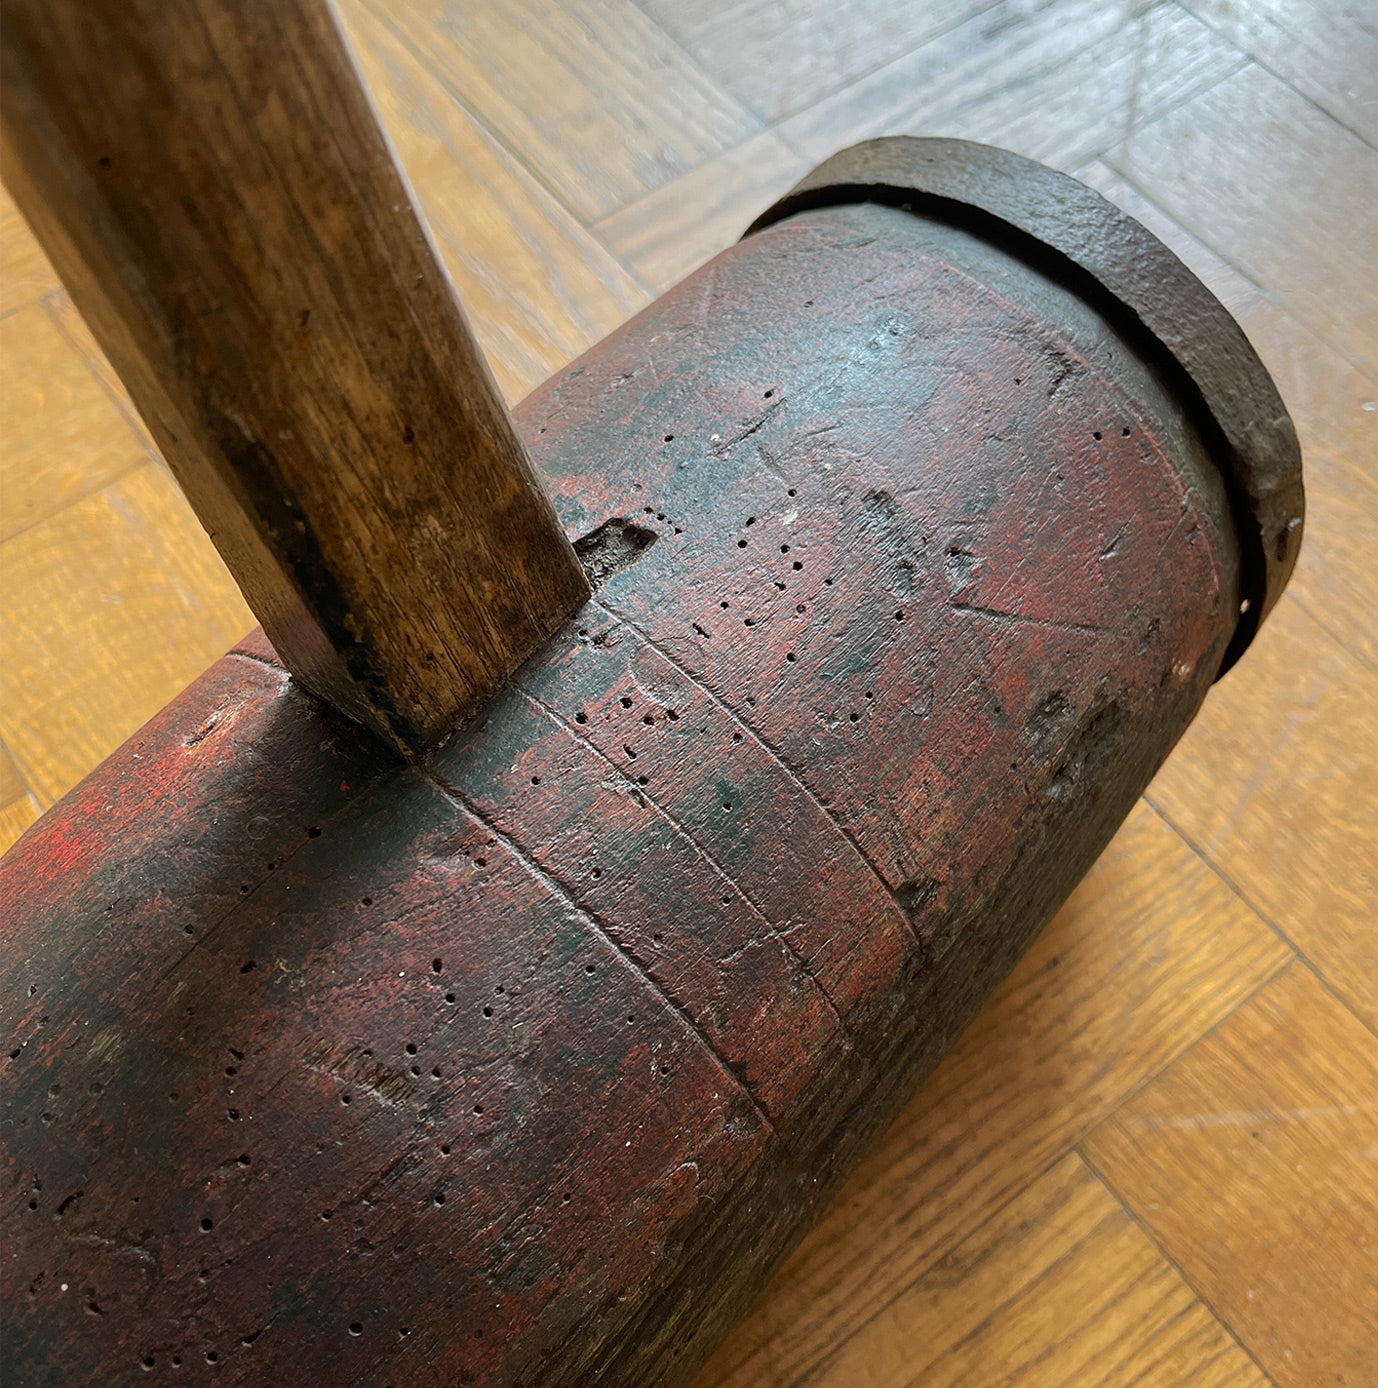 A Large Antique Circus/Fairground Hammer with remnants of its original red paint. It has two metal riveted straps at each end with a sturdy hickory handle - SHOP NOW - www.itovintage.co.uk